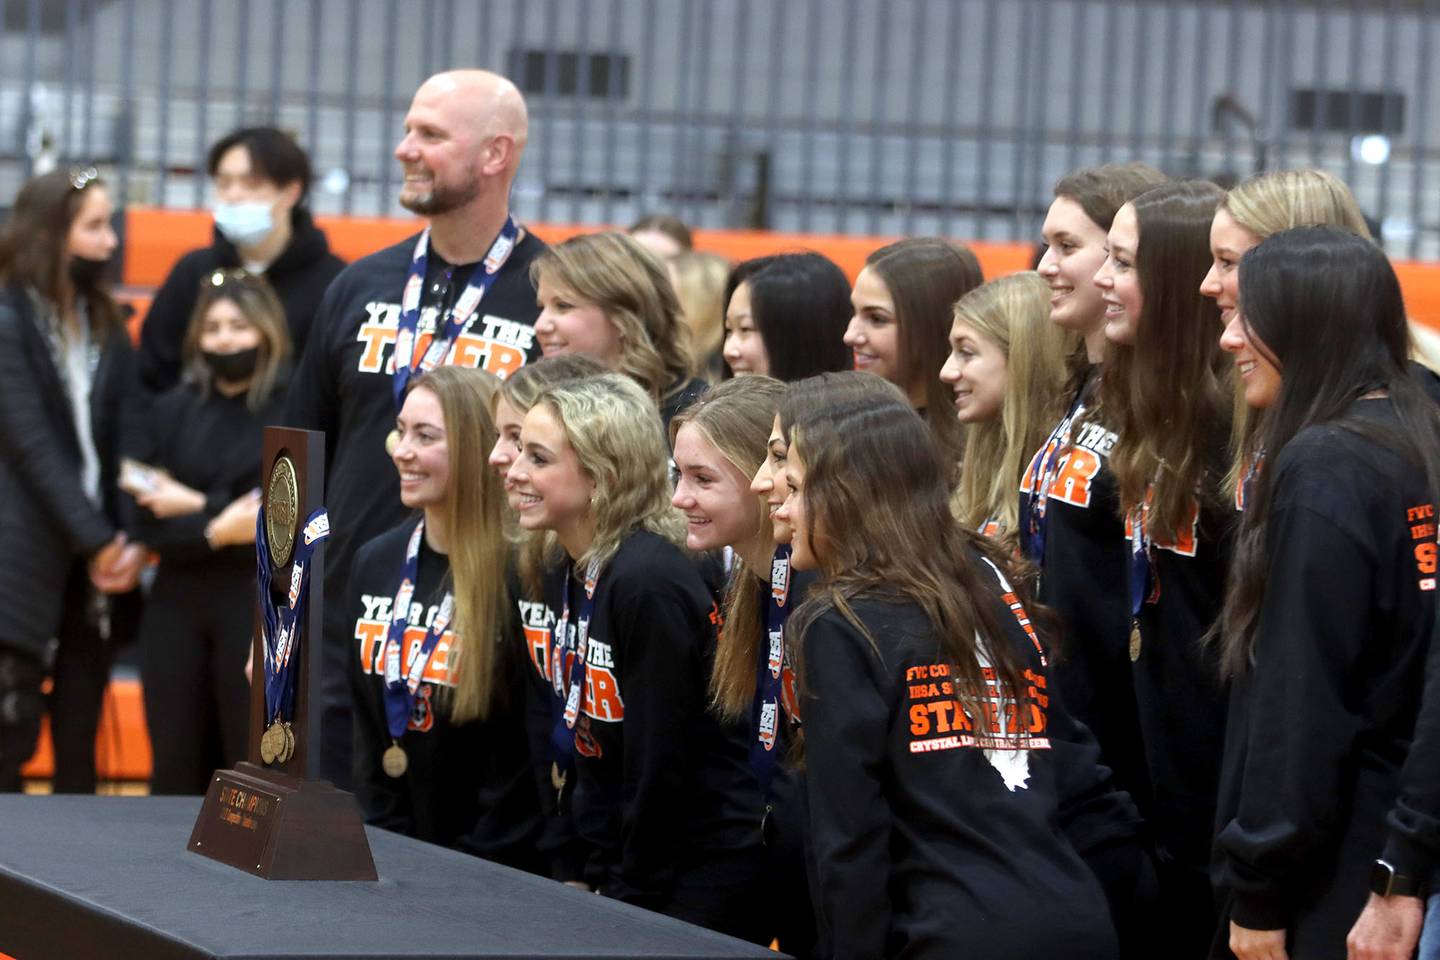 Team members pictured at Grossinger Motors Arena in Bloomington as Crystal Lake Central held a celebration Sunday in the gymnasium after the Tigers won the IHSA state title on Saturday for their competitive cheerleading mediums team. I took